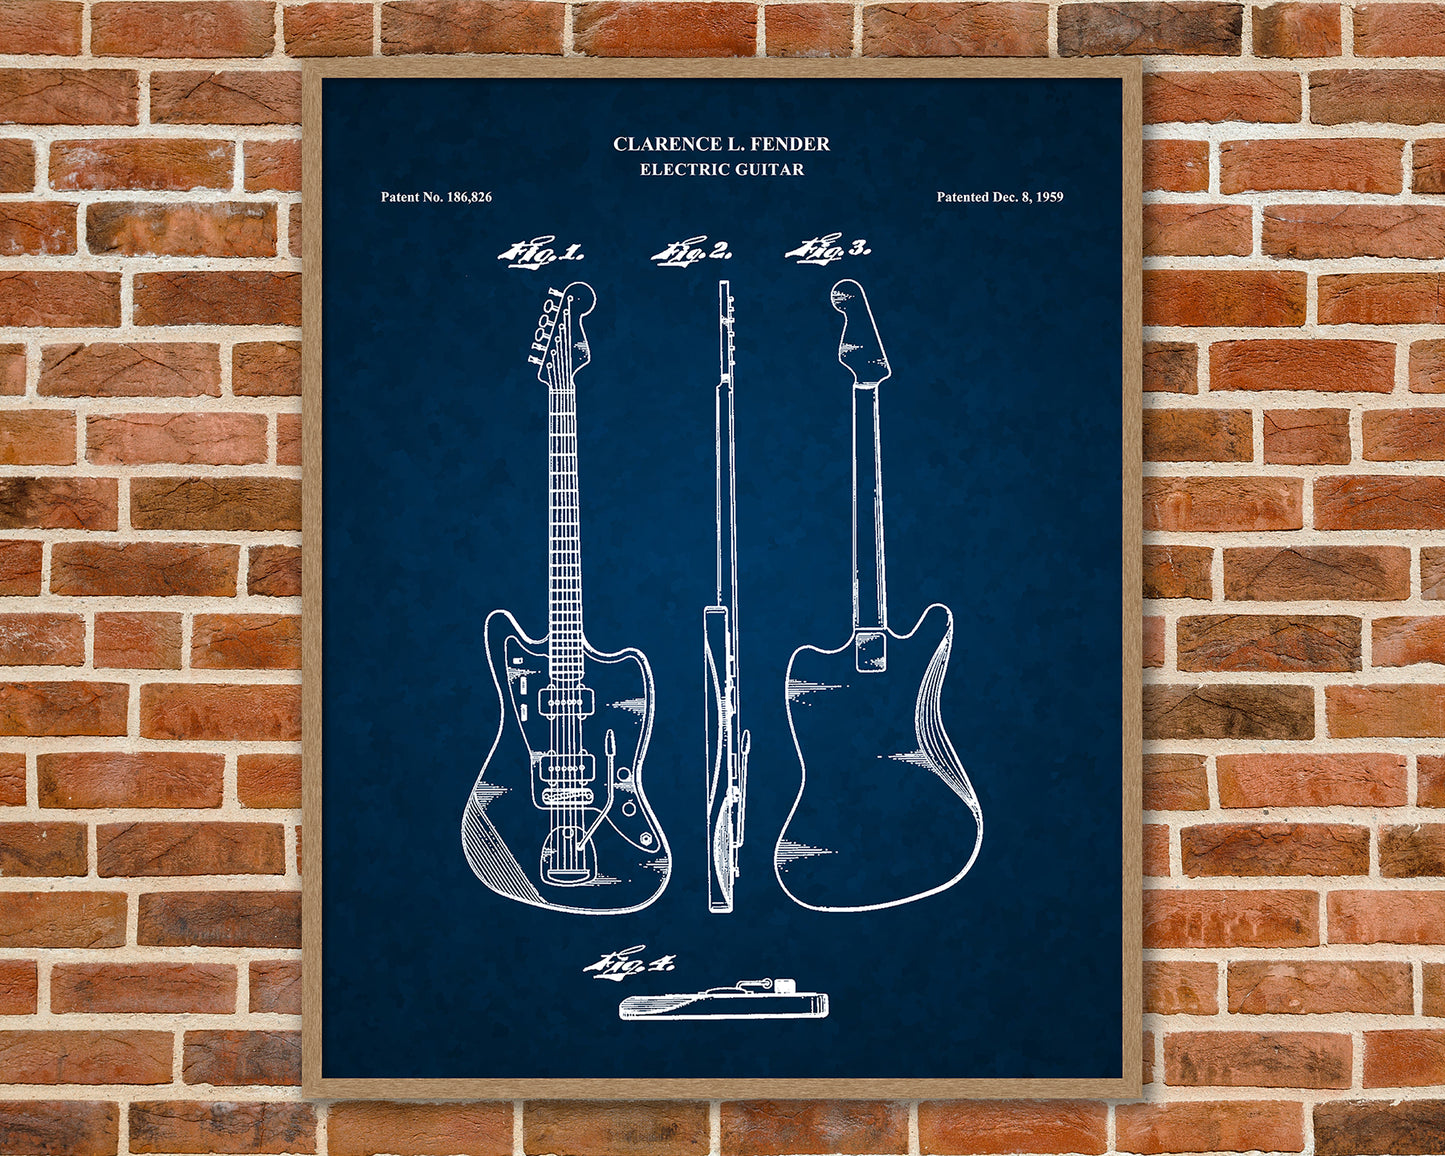 Guitar Patent Drawings, Music Studio Wall Art Poster, Great Vintage Room Decor, Art Prints, Musician Decor Gifts 03202